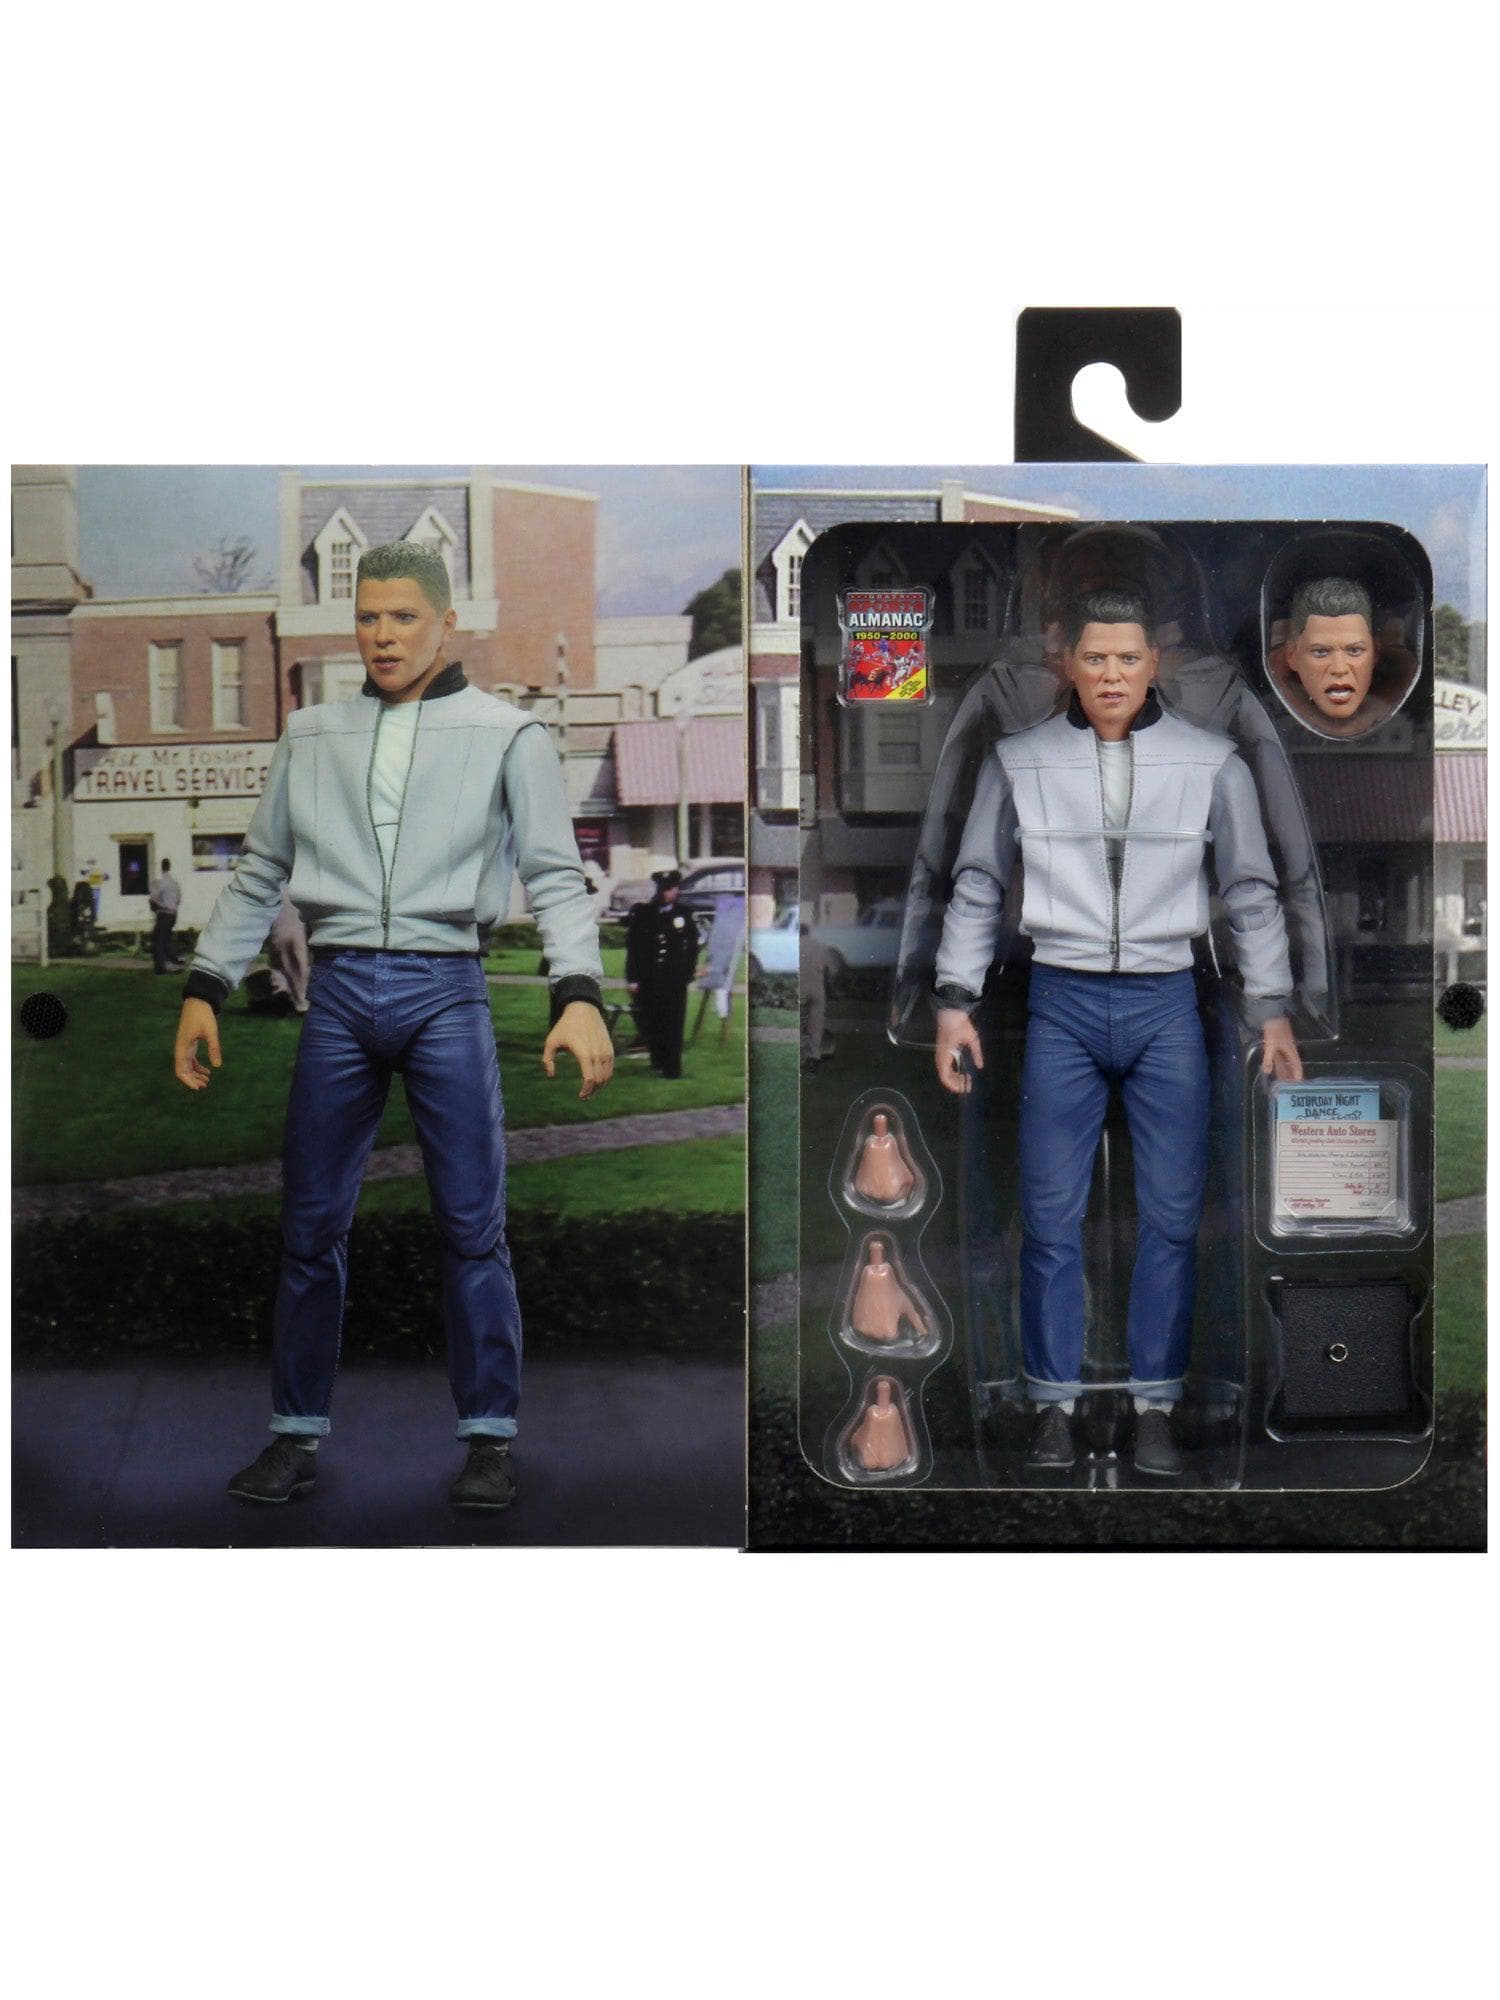 NECA - Back to the Future - 7" Scale Action Figure - Ultimate Biff - costumes.com